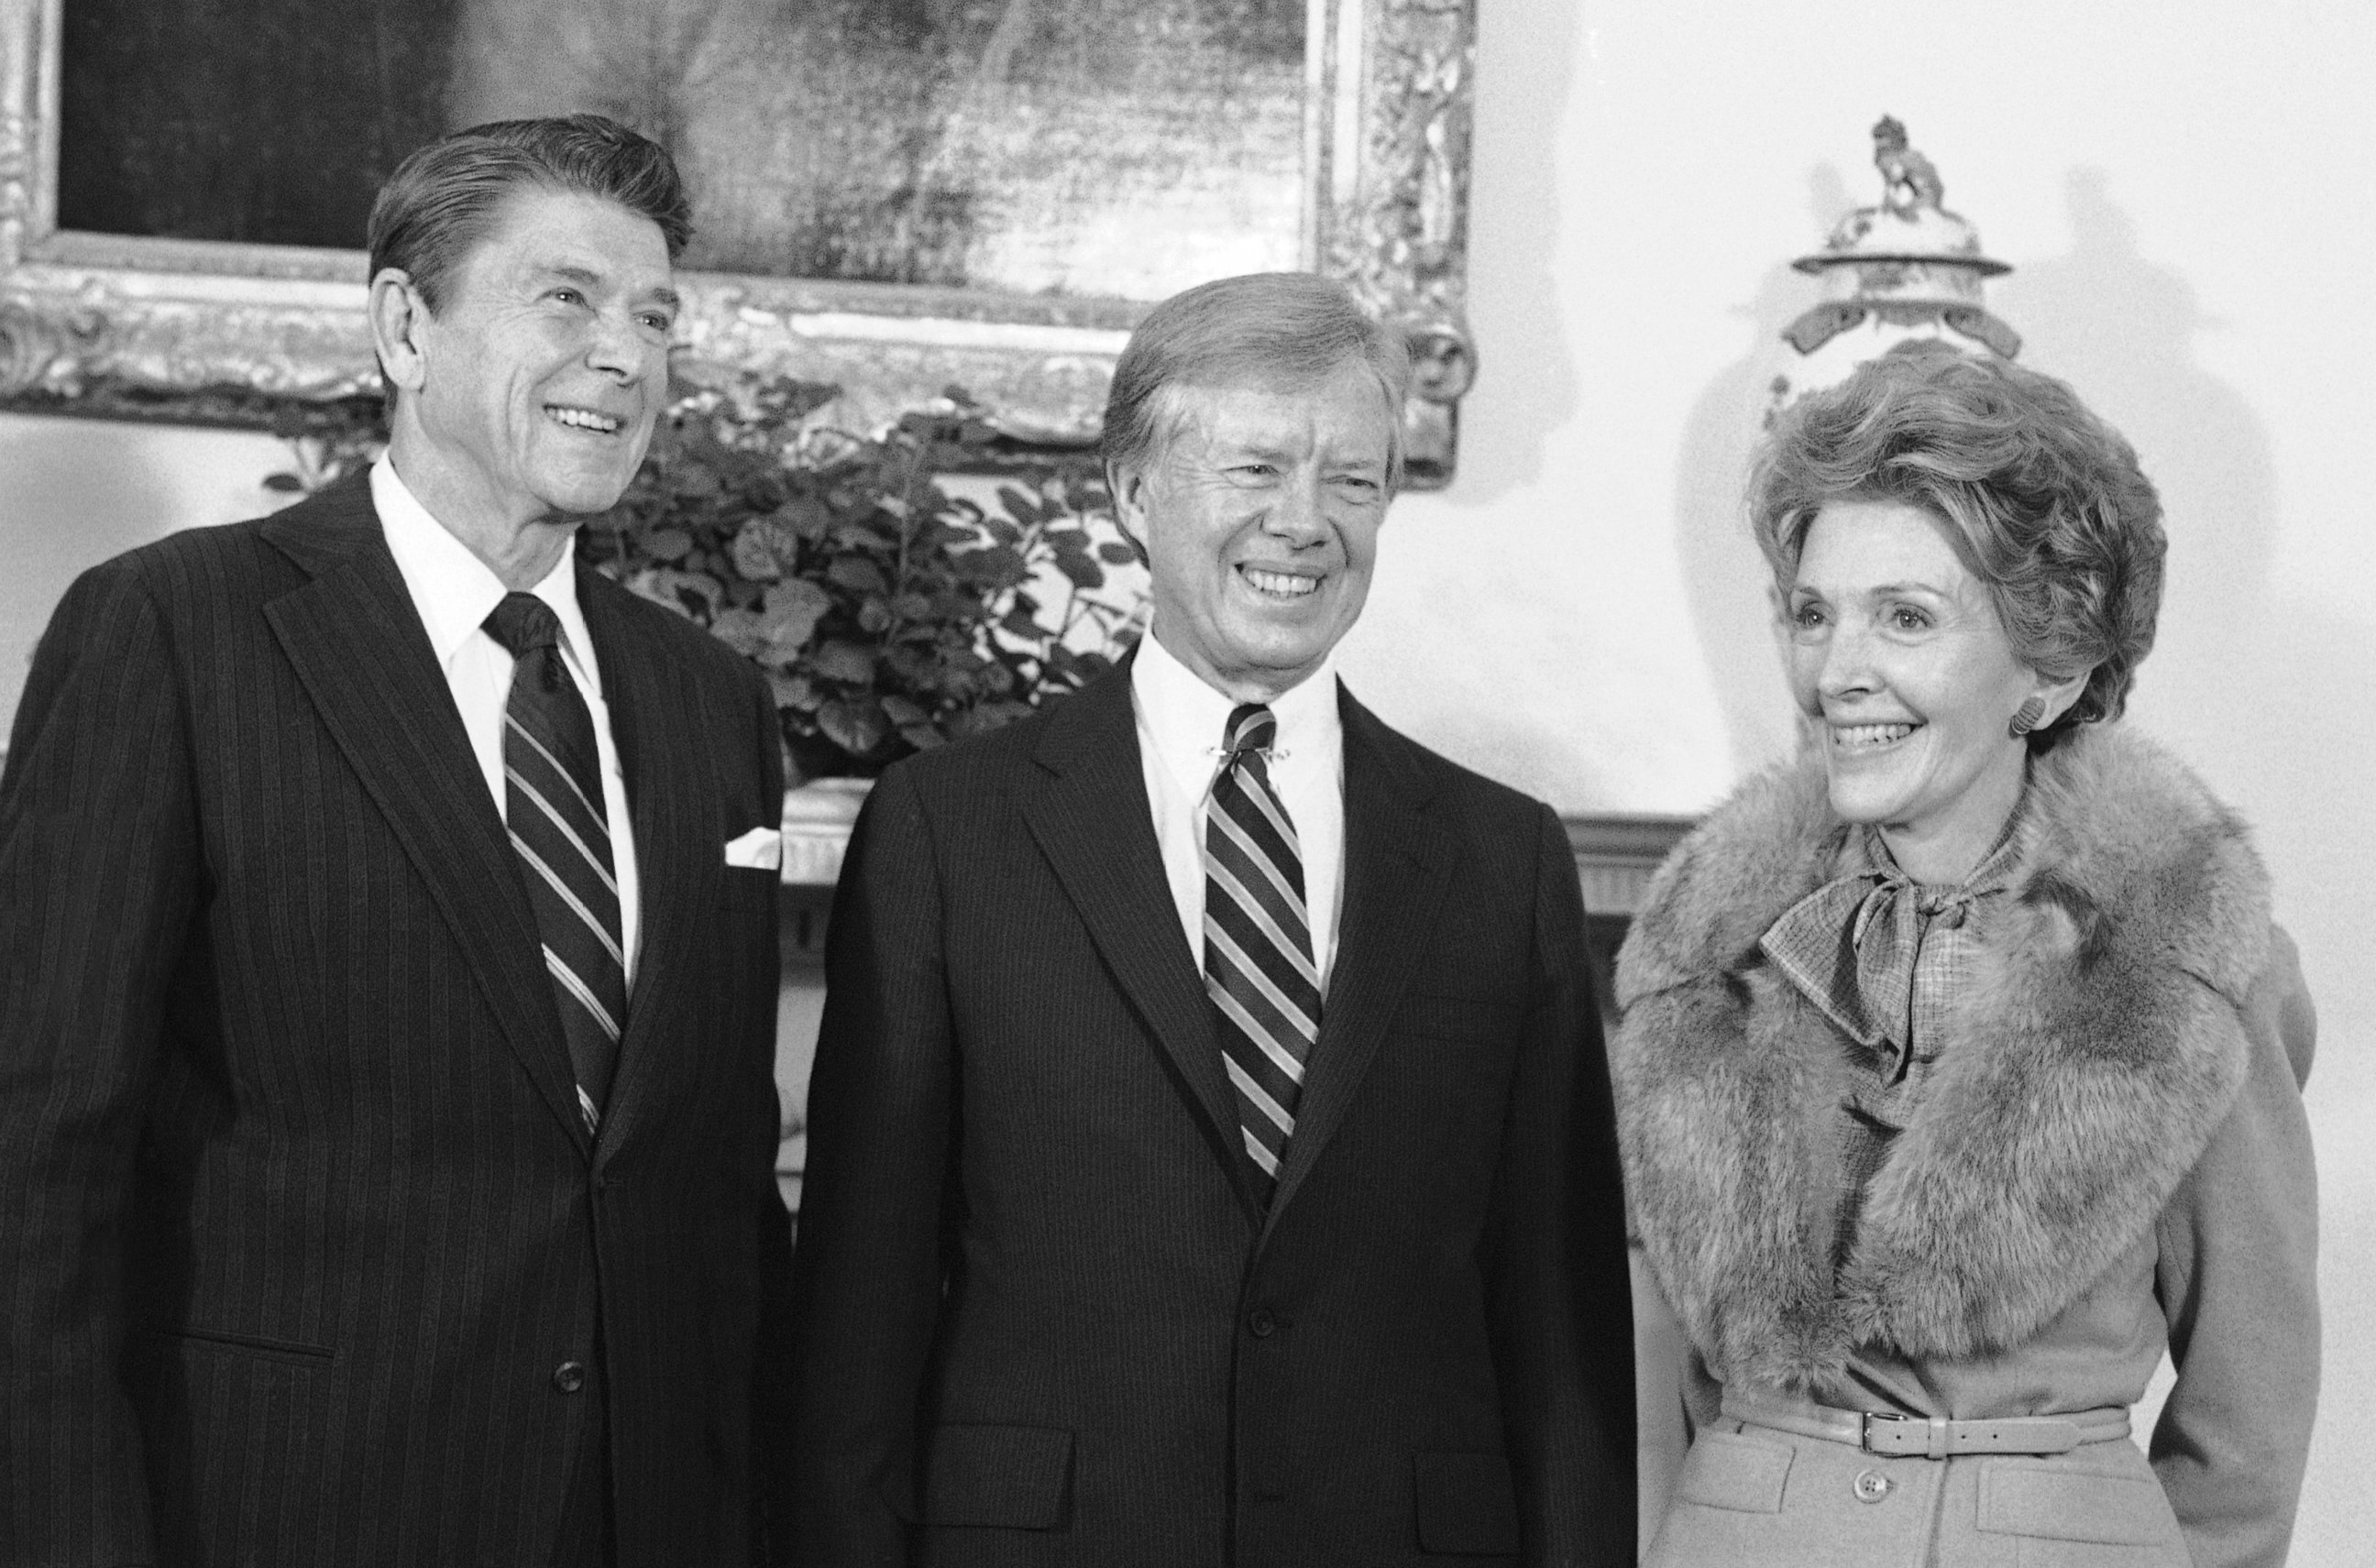 PHOTO: President Jimmy Carter shown with President-elect Ronald Reagan and his wife Nancy in the Oval Office of the White House on Nov. 20, 1980. Mrs. Reagan received a tour of the family quarters while the two leaders met in the Oval Office. 